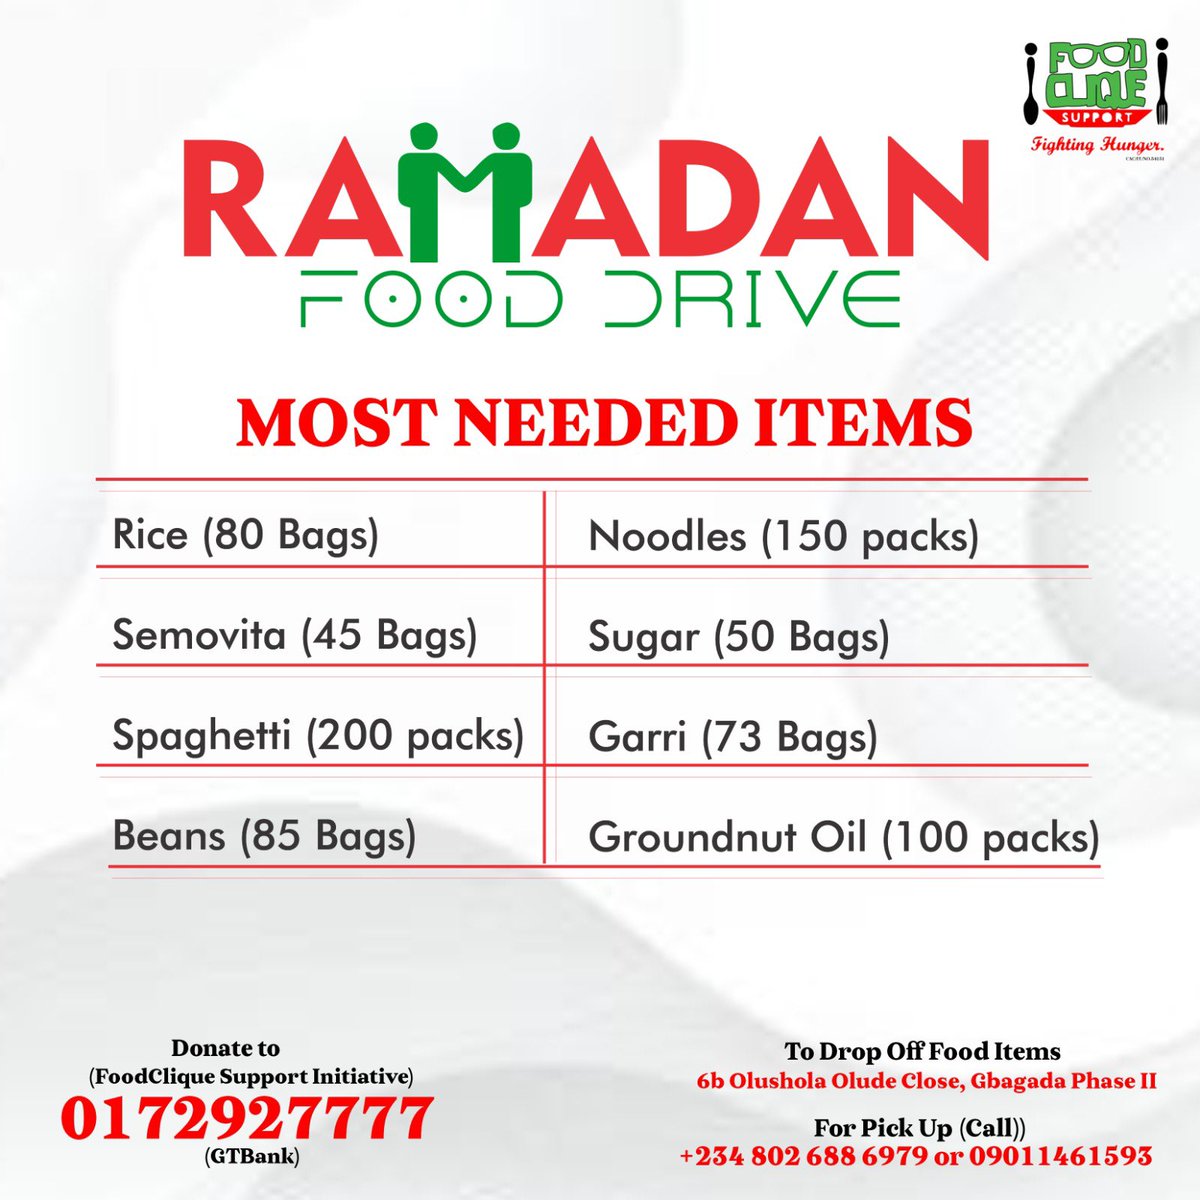 This Ramadan, you can: Donate Food Items: These are the most needed food items we need to feed the underserved people in various communities for the fasting season. We can pick up these food items from you or you can drop off at our office, 6B Olushola Olude Close gbagada phase 2